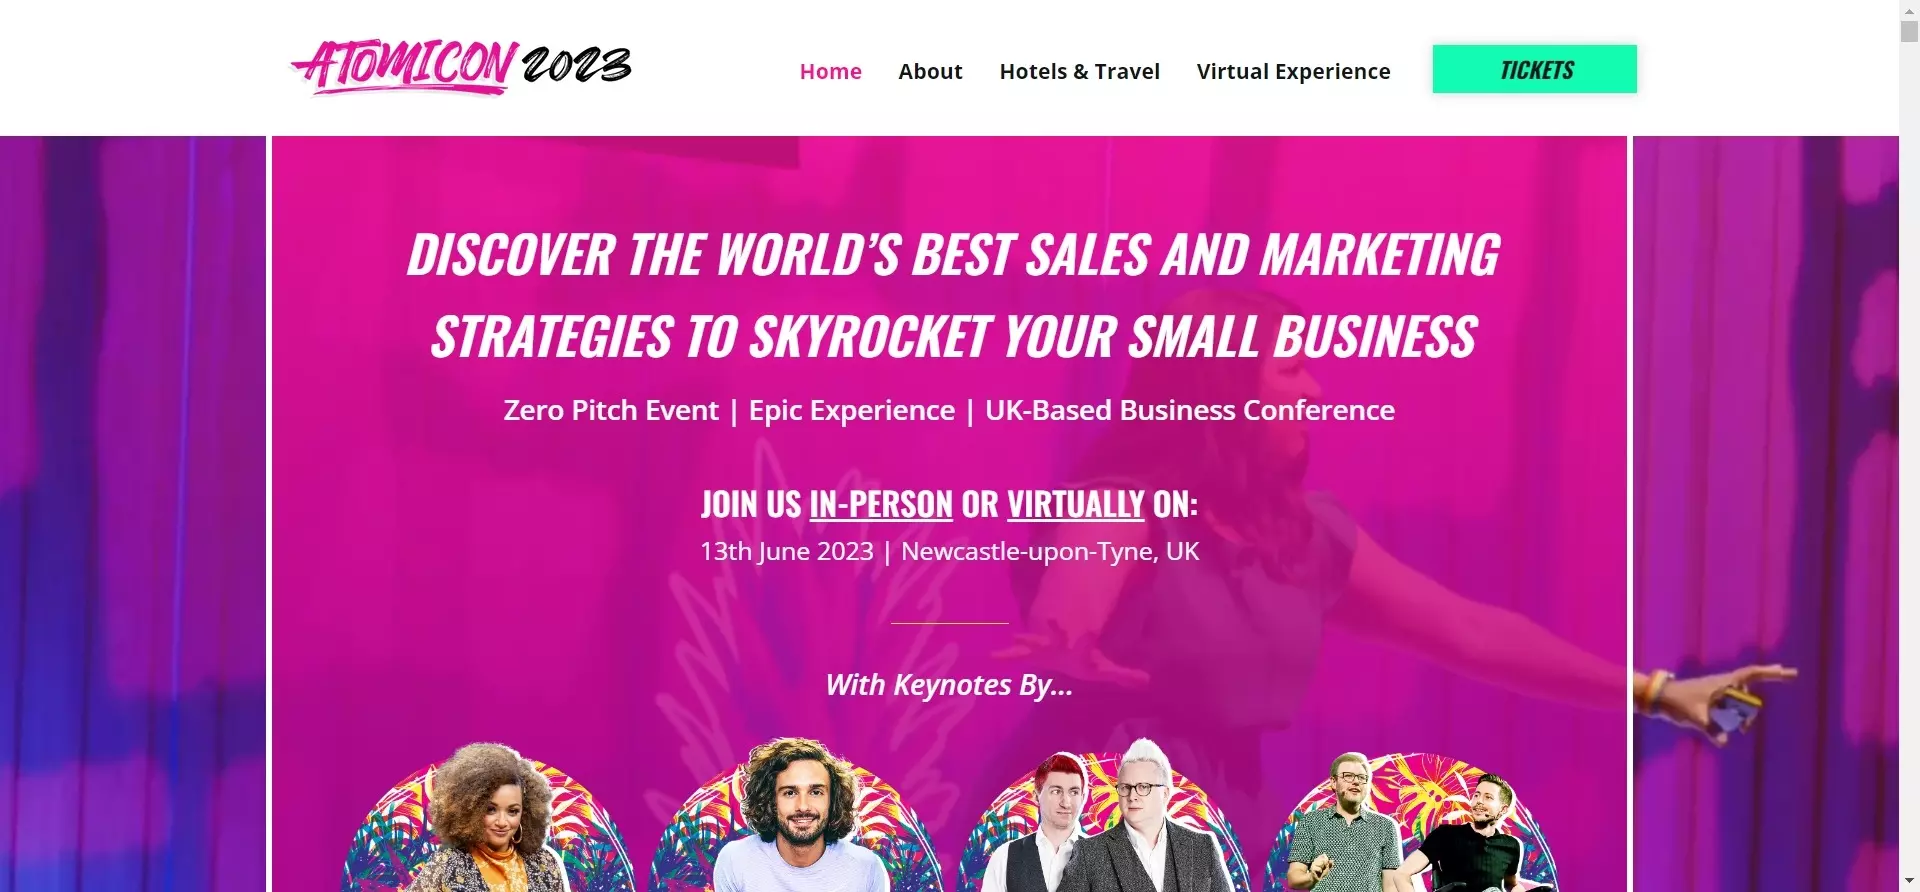 email marketing event atomicon new castle uk